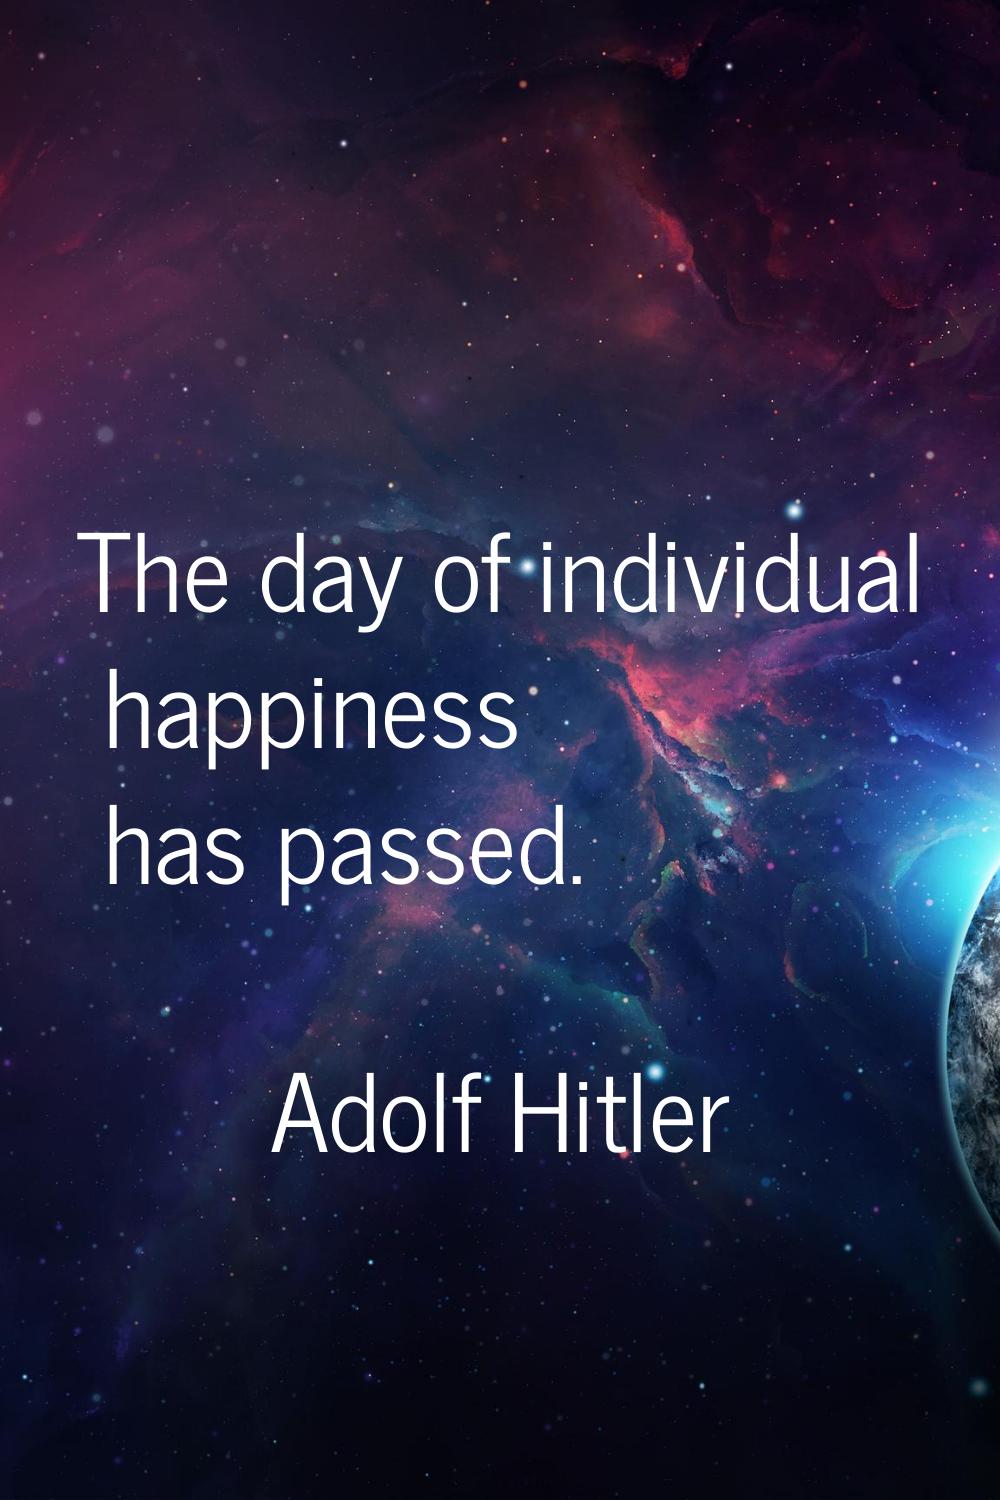 The day of individual happiness has passed.